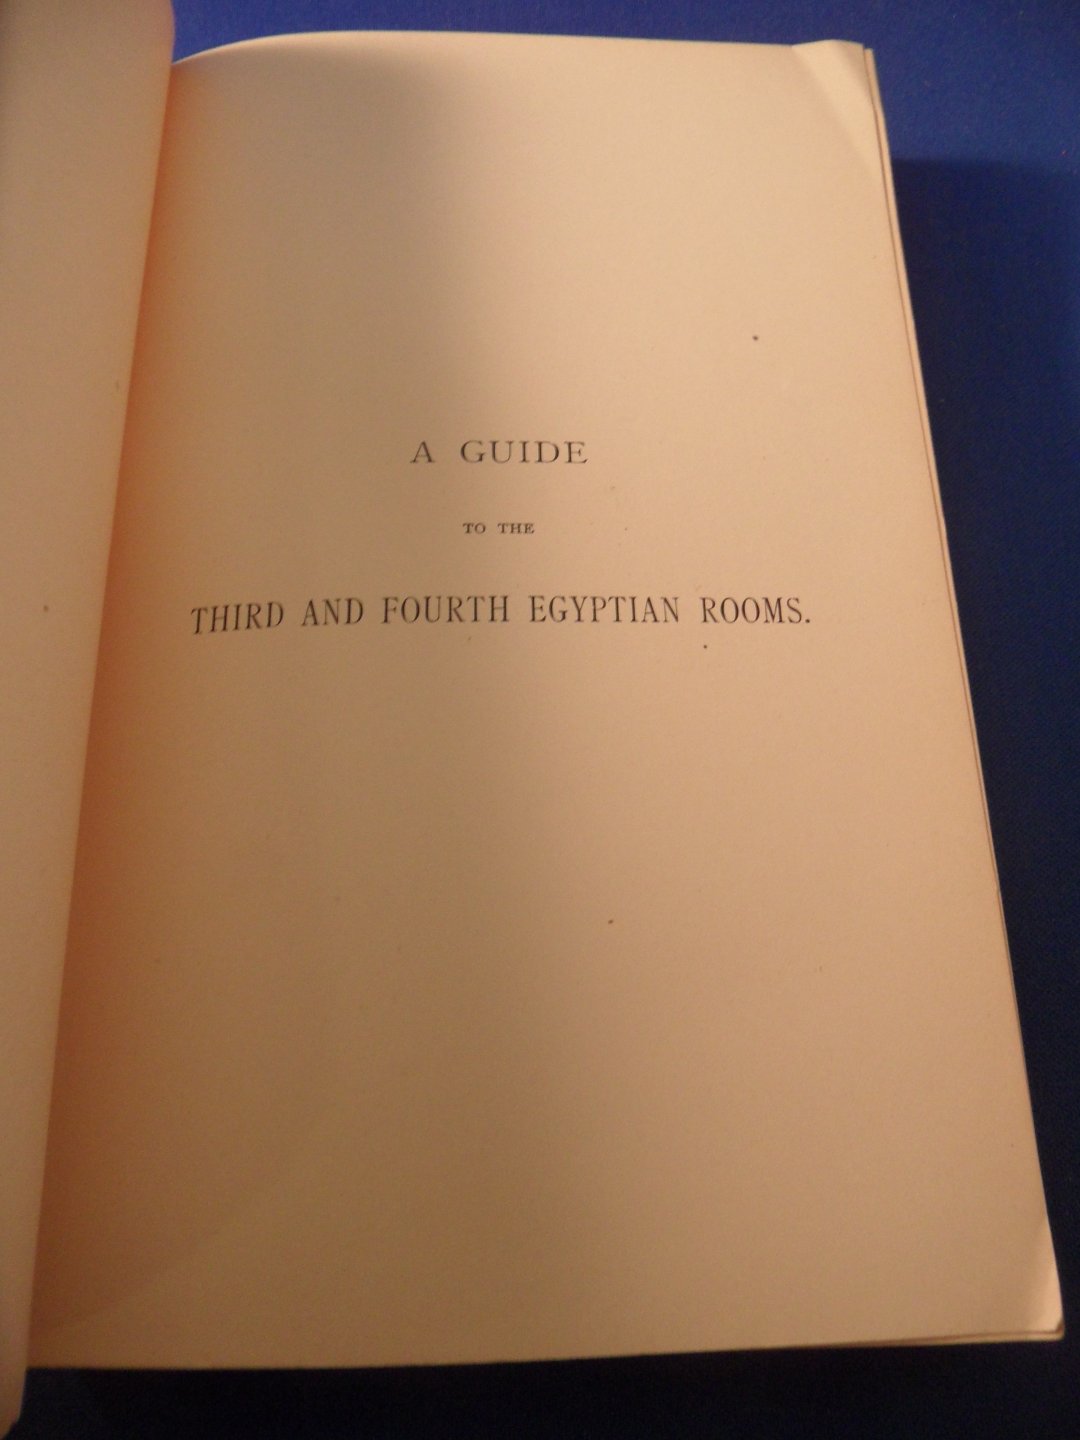 Wallis Budge, E.A. - a guide to the third and fourth egyptian rooms